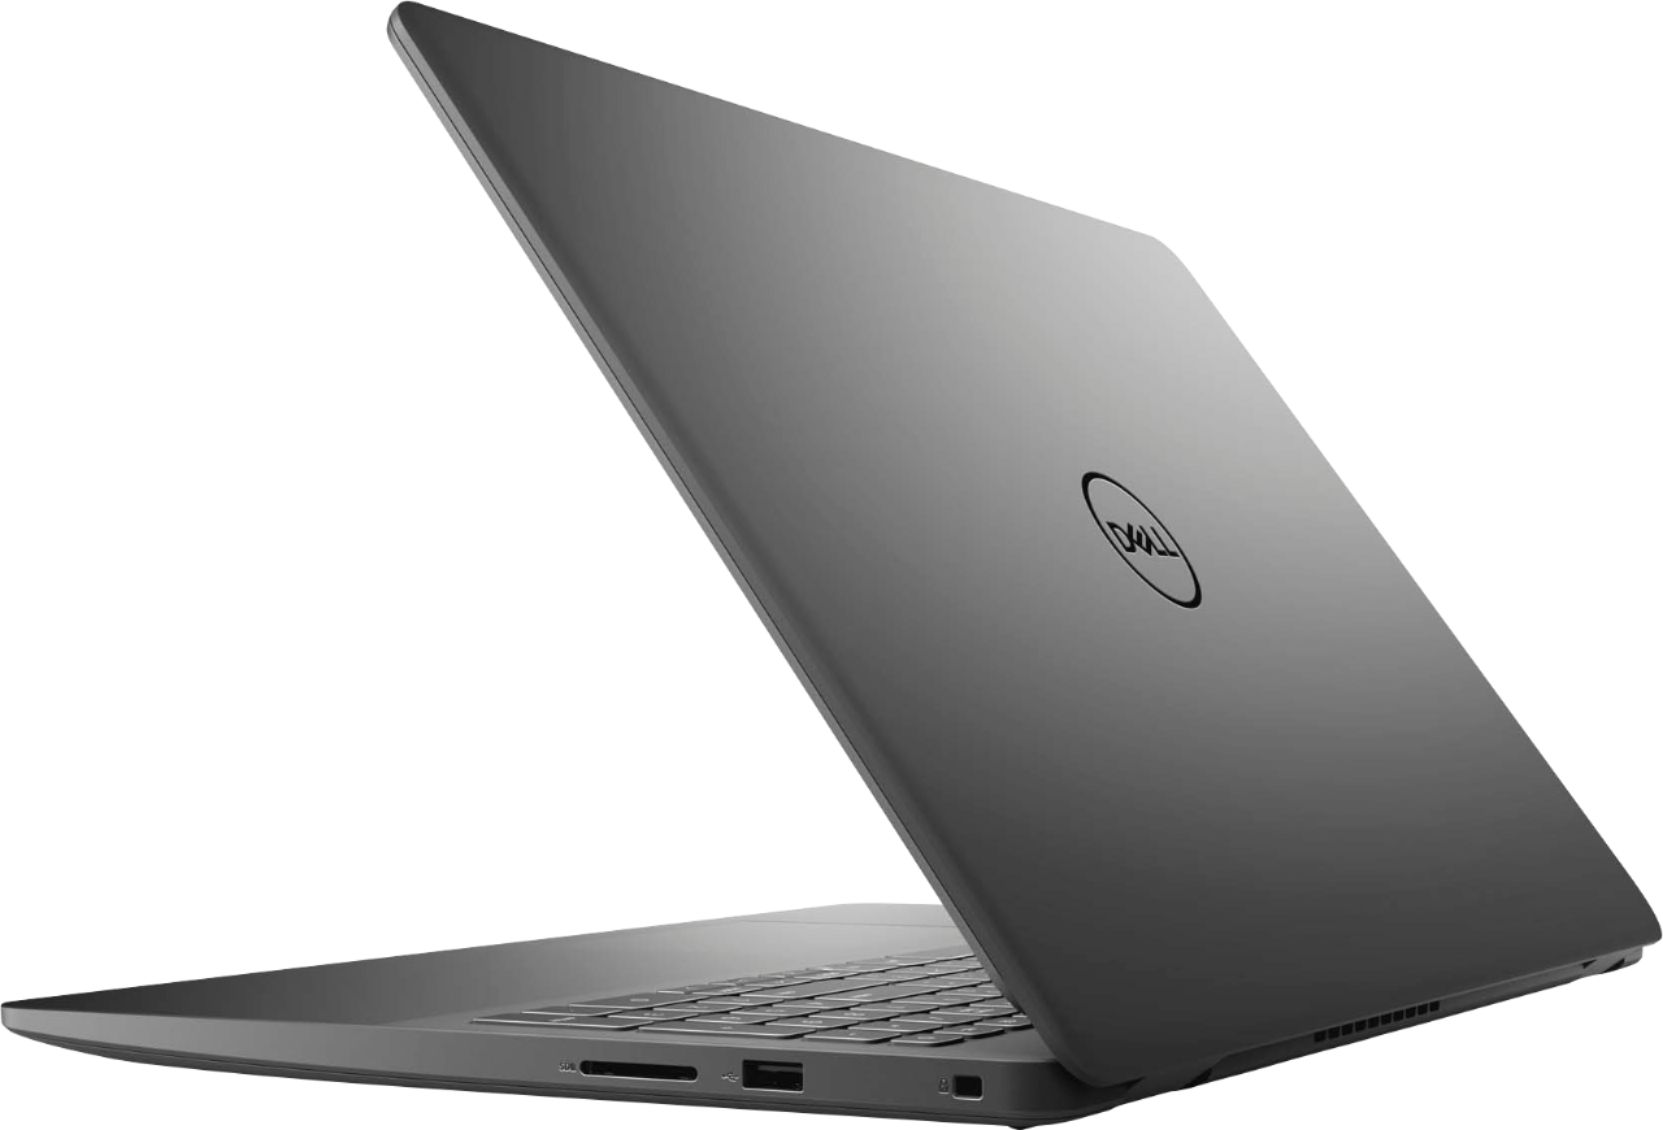 Dell - Inspiron 15.6" FHD Touch Laptop -Intel Core i5-1035G1 - 8GB RAM - 256 GB SSD - Black - image 5 of 7